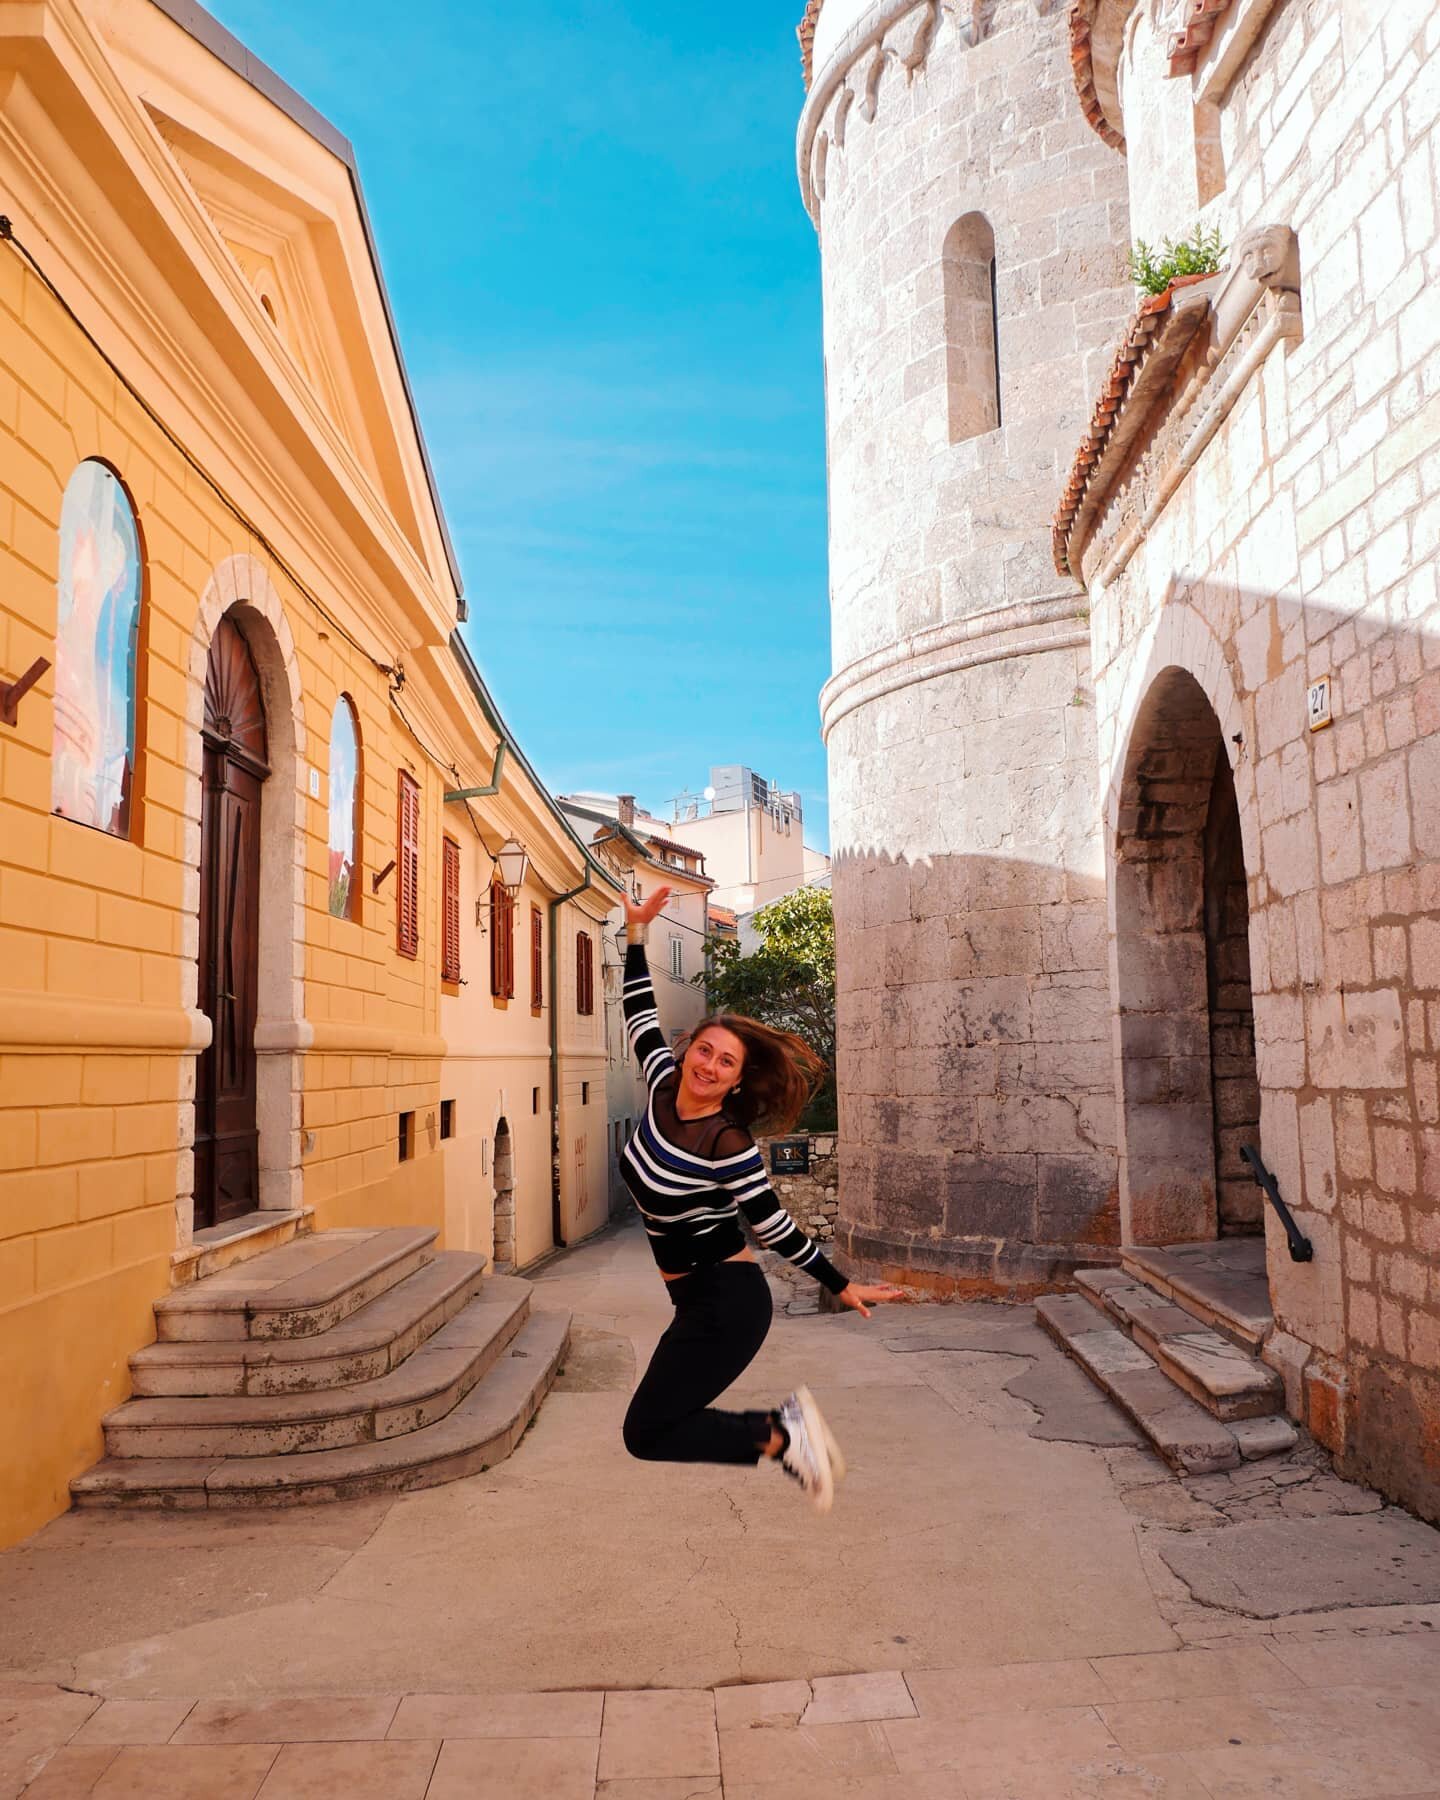 Krk Island 🏝️
. 
🇬🇧 Here she goes again with her jump, it has been a long time 🙄😇
.
Today, I'm bringing you a bit out of Istria province. This place was not initially part of our plan (well as you may have followed, Croatia was initially not pla